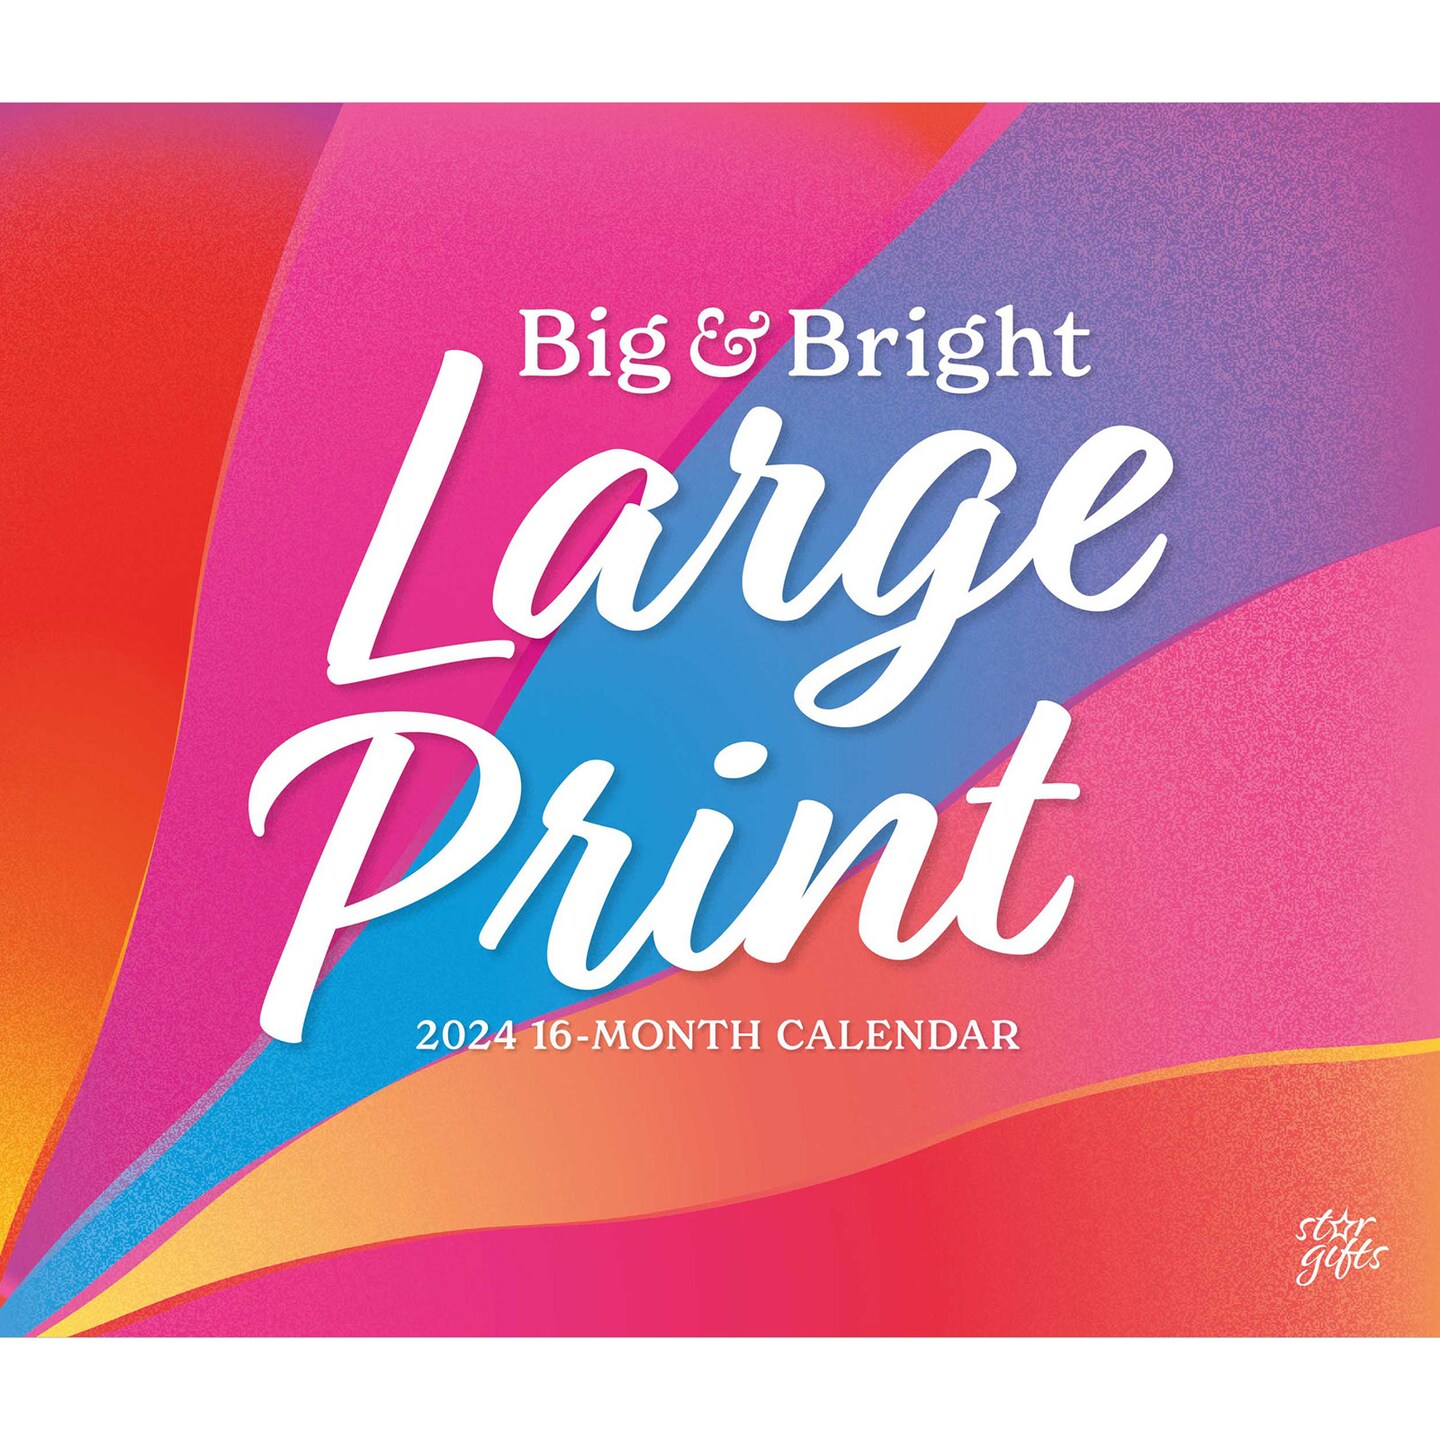 Big & Bright Large Print 2024 14 x 24 Inch Monthly Deluxe Wall